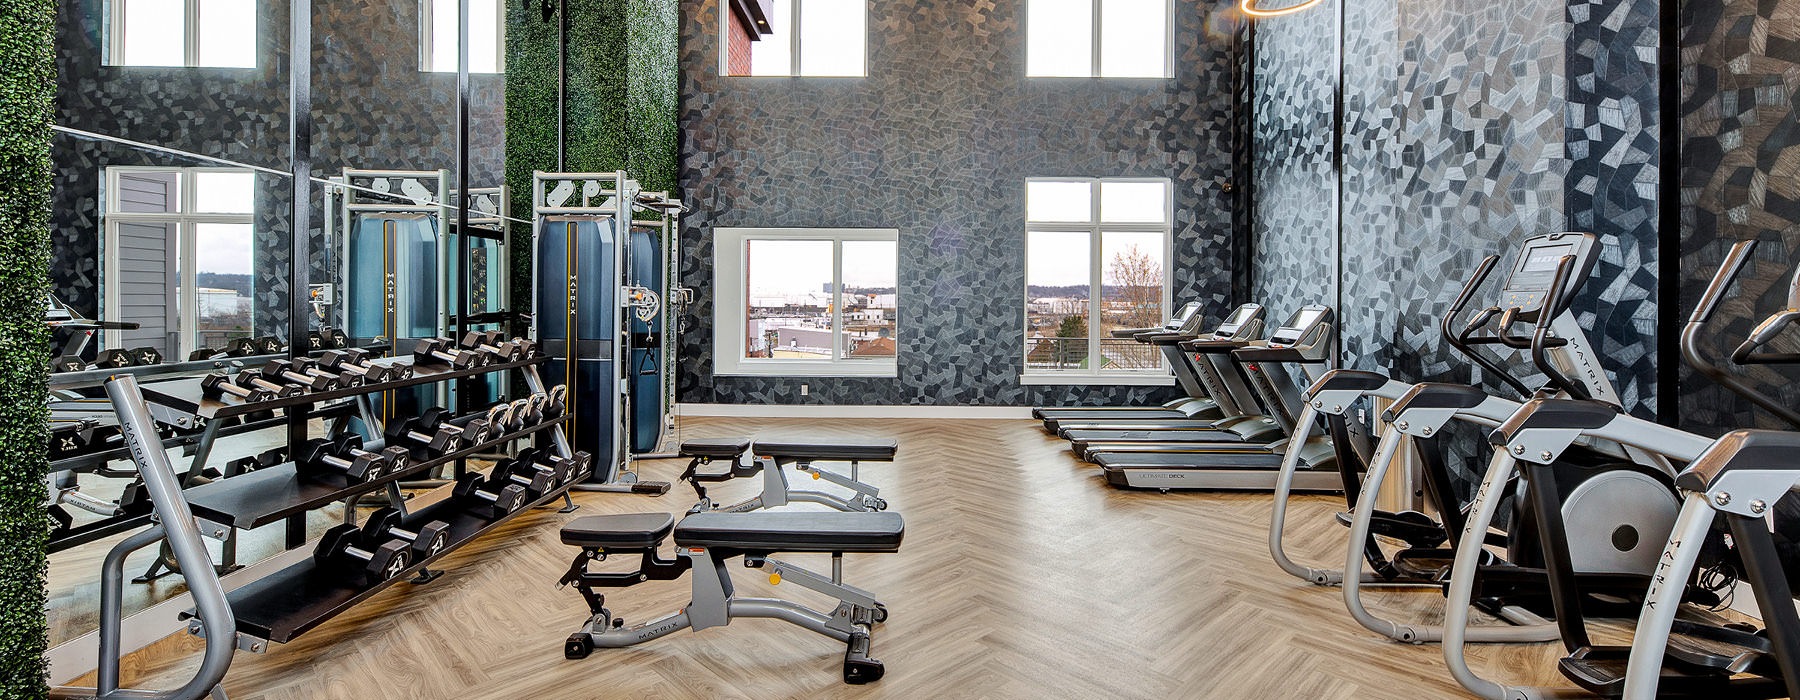 State-of-the-Art Fitness Center with high ceilings and large windows